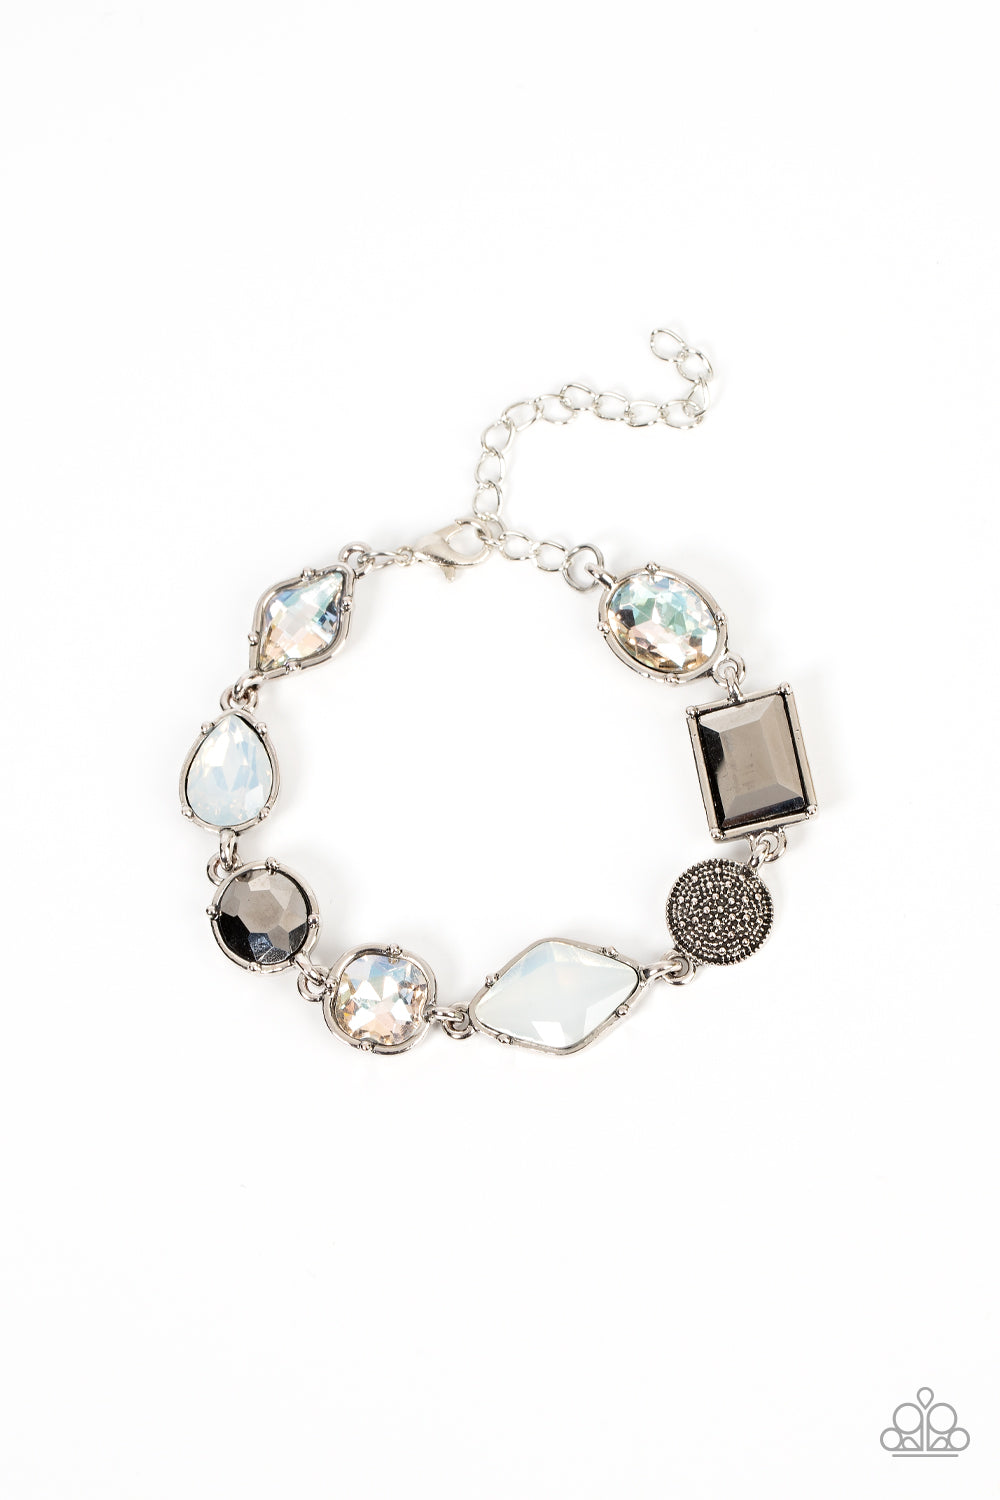 Jewelry Box Bauble - Opal - Hematite - Silver Bracelet - Paparazzi Accessories - Encased in pronged silver fittings, a mismatched collection of white, hematite, and opal rhinestones delicately links with a studded silver frame around the wrist for a sentimental sparkle. Features an adjustable clasp closure.